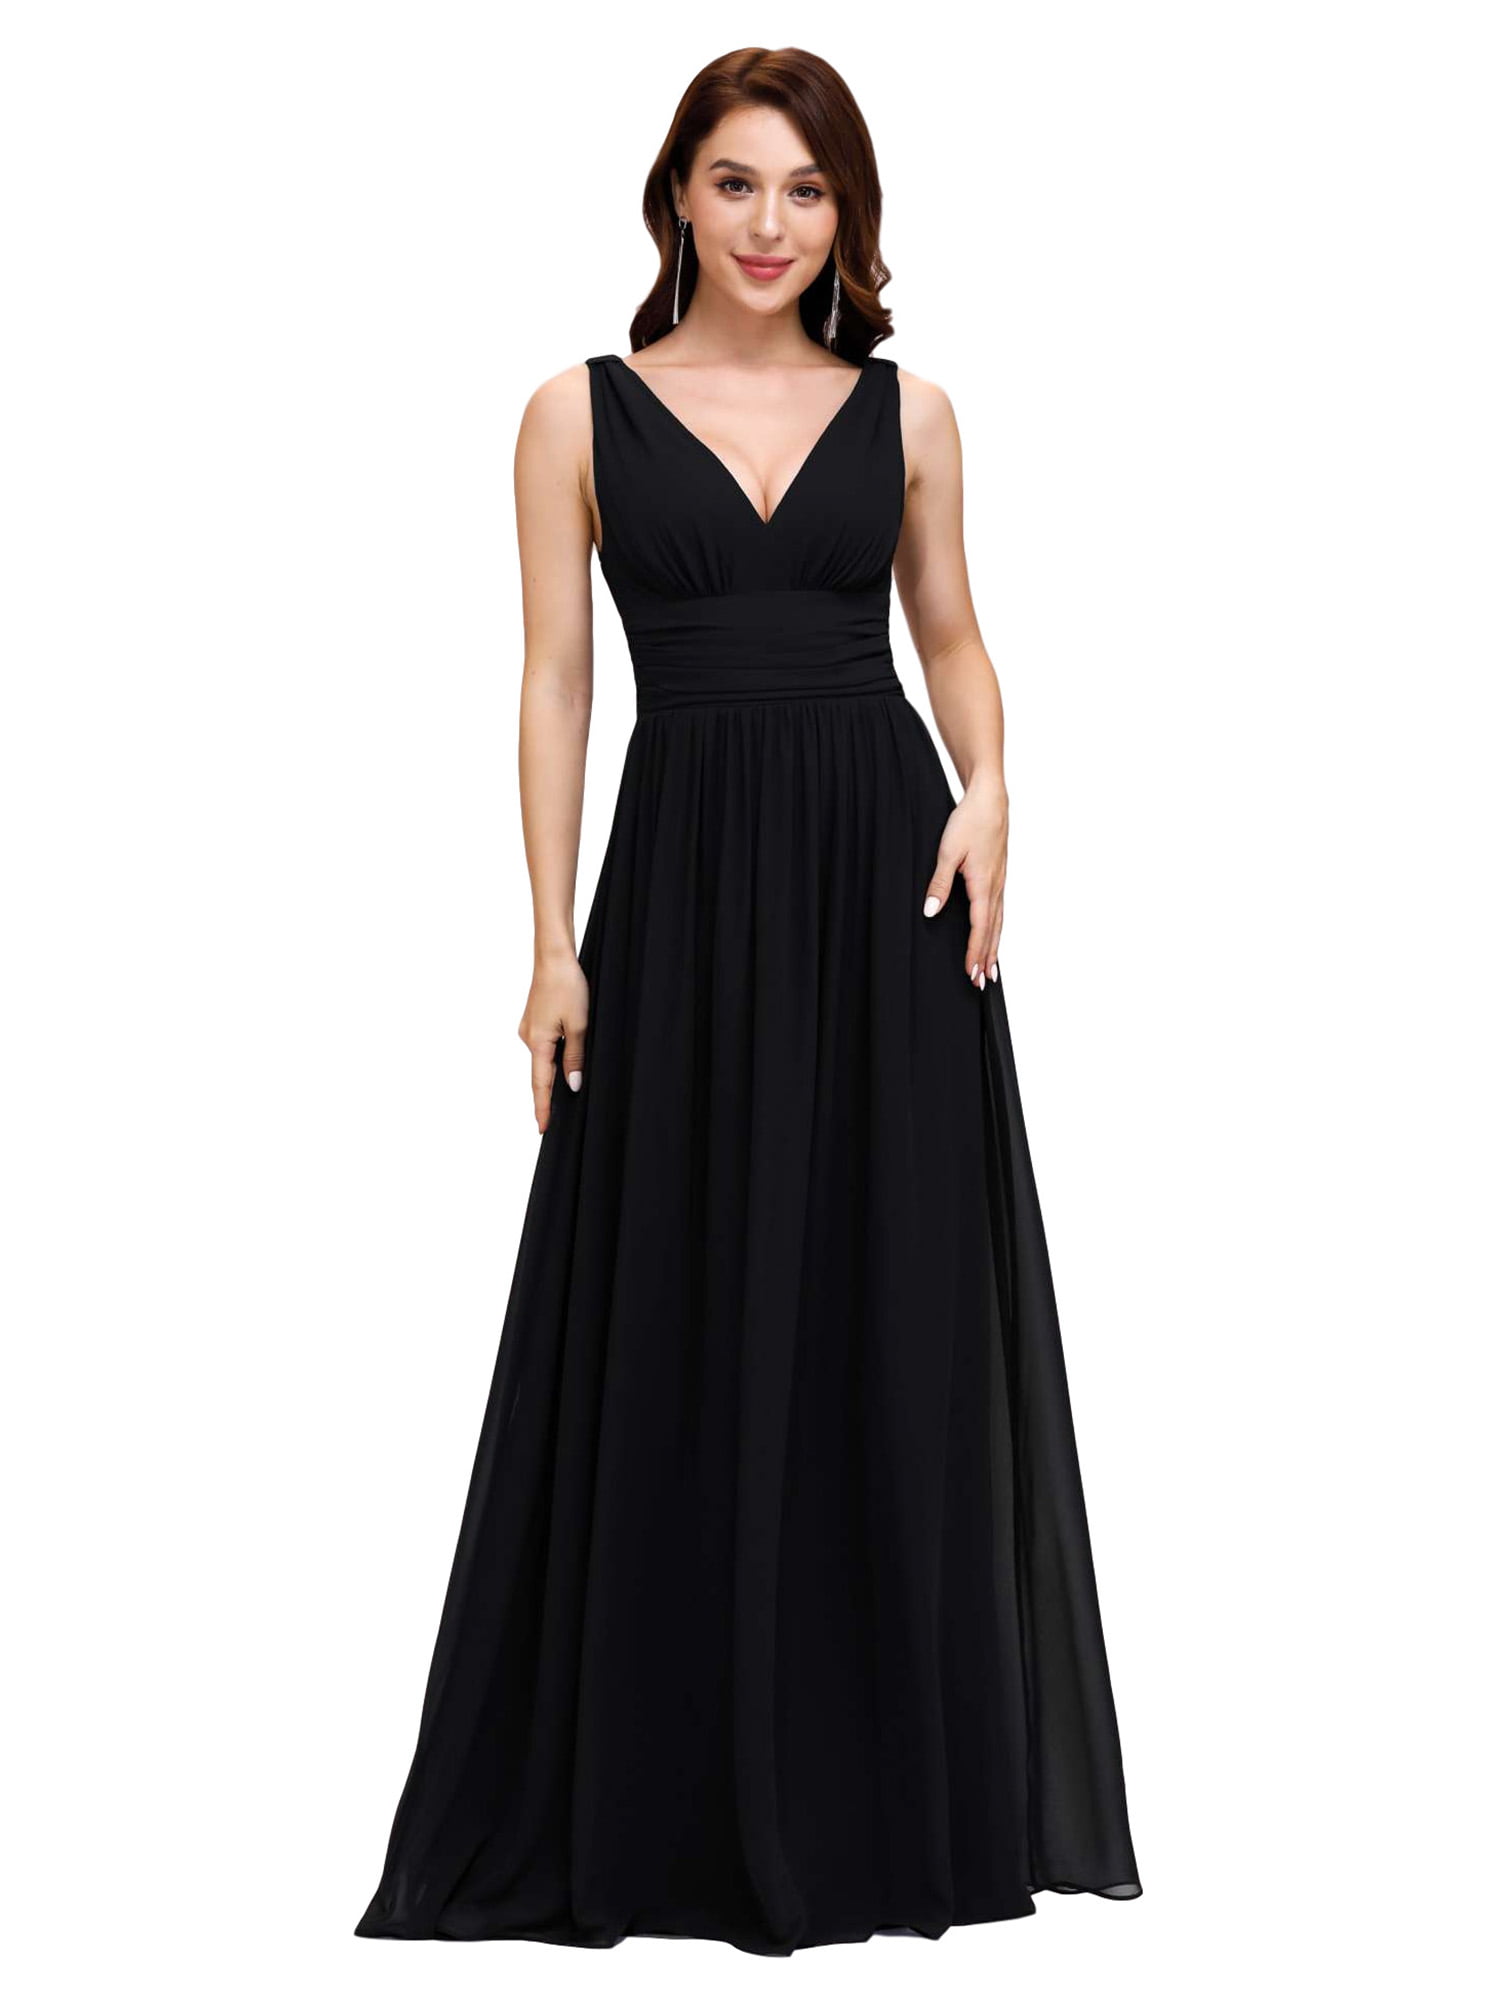 Womens Long Formal Dresses With Jackets : Slantway Plus Size Prom ...